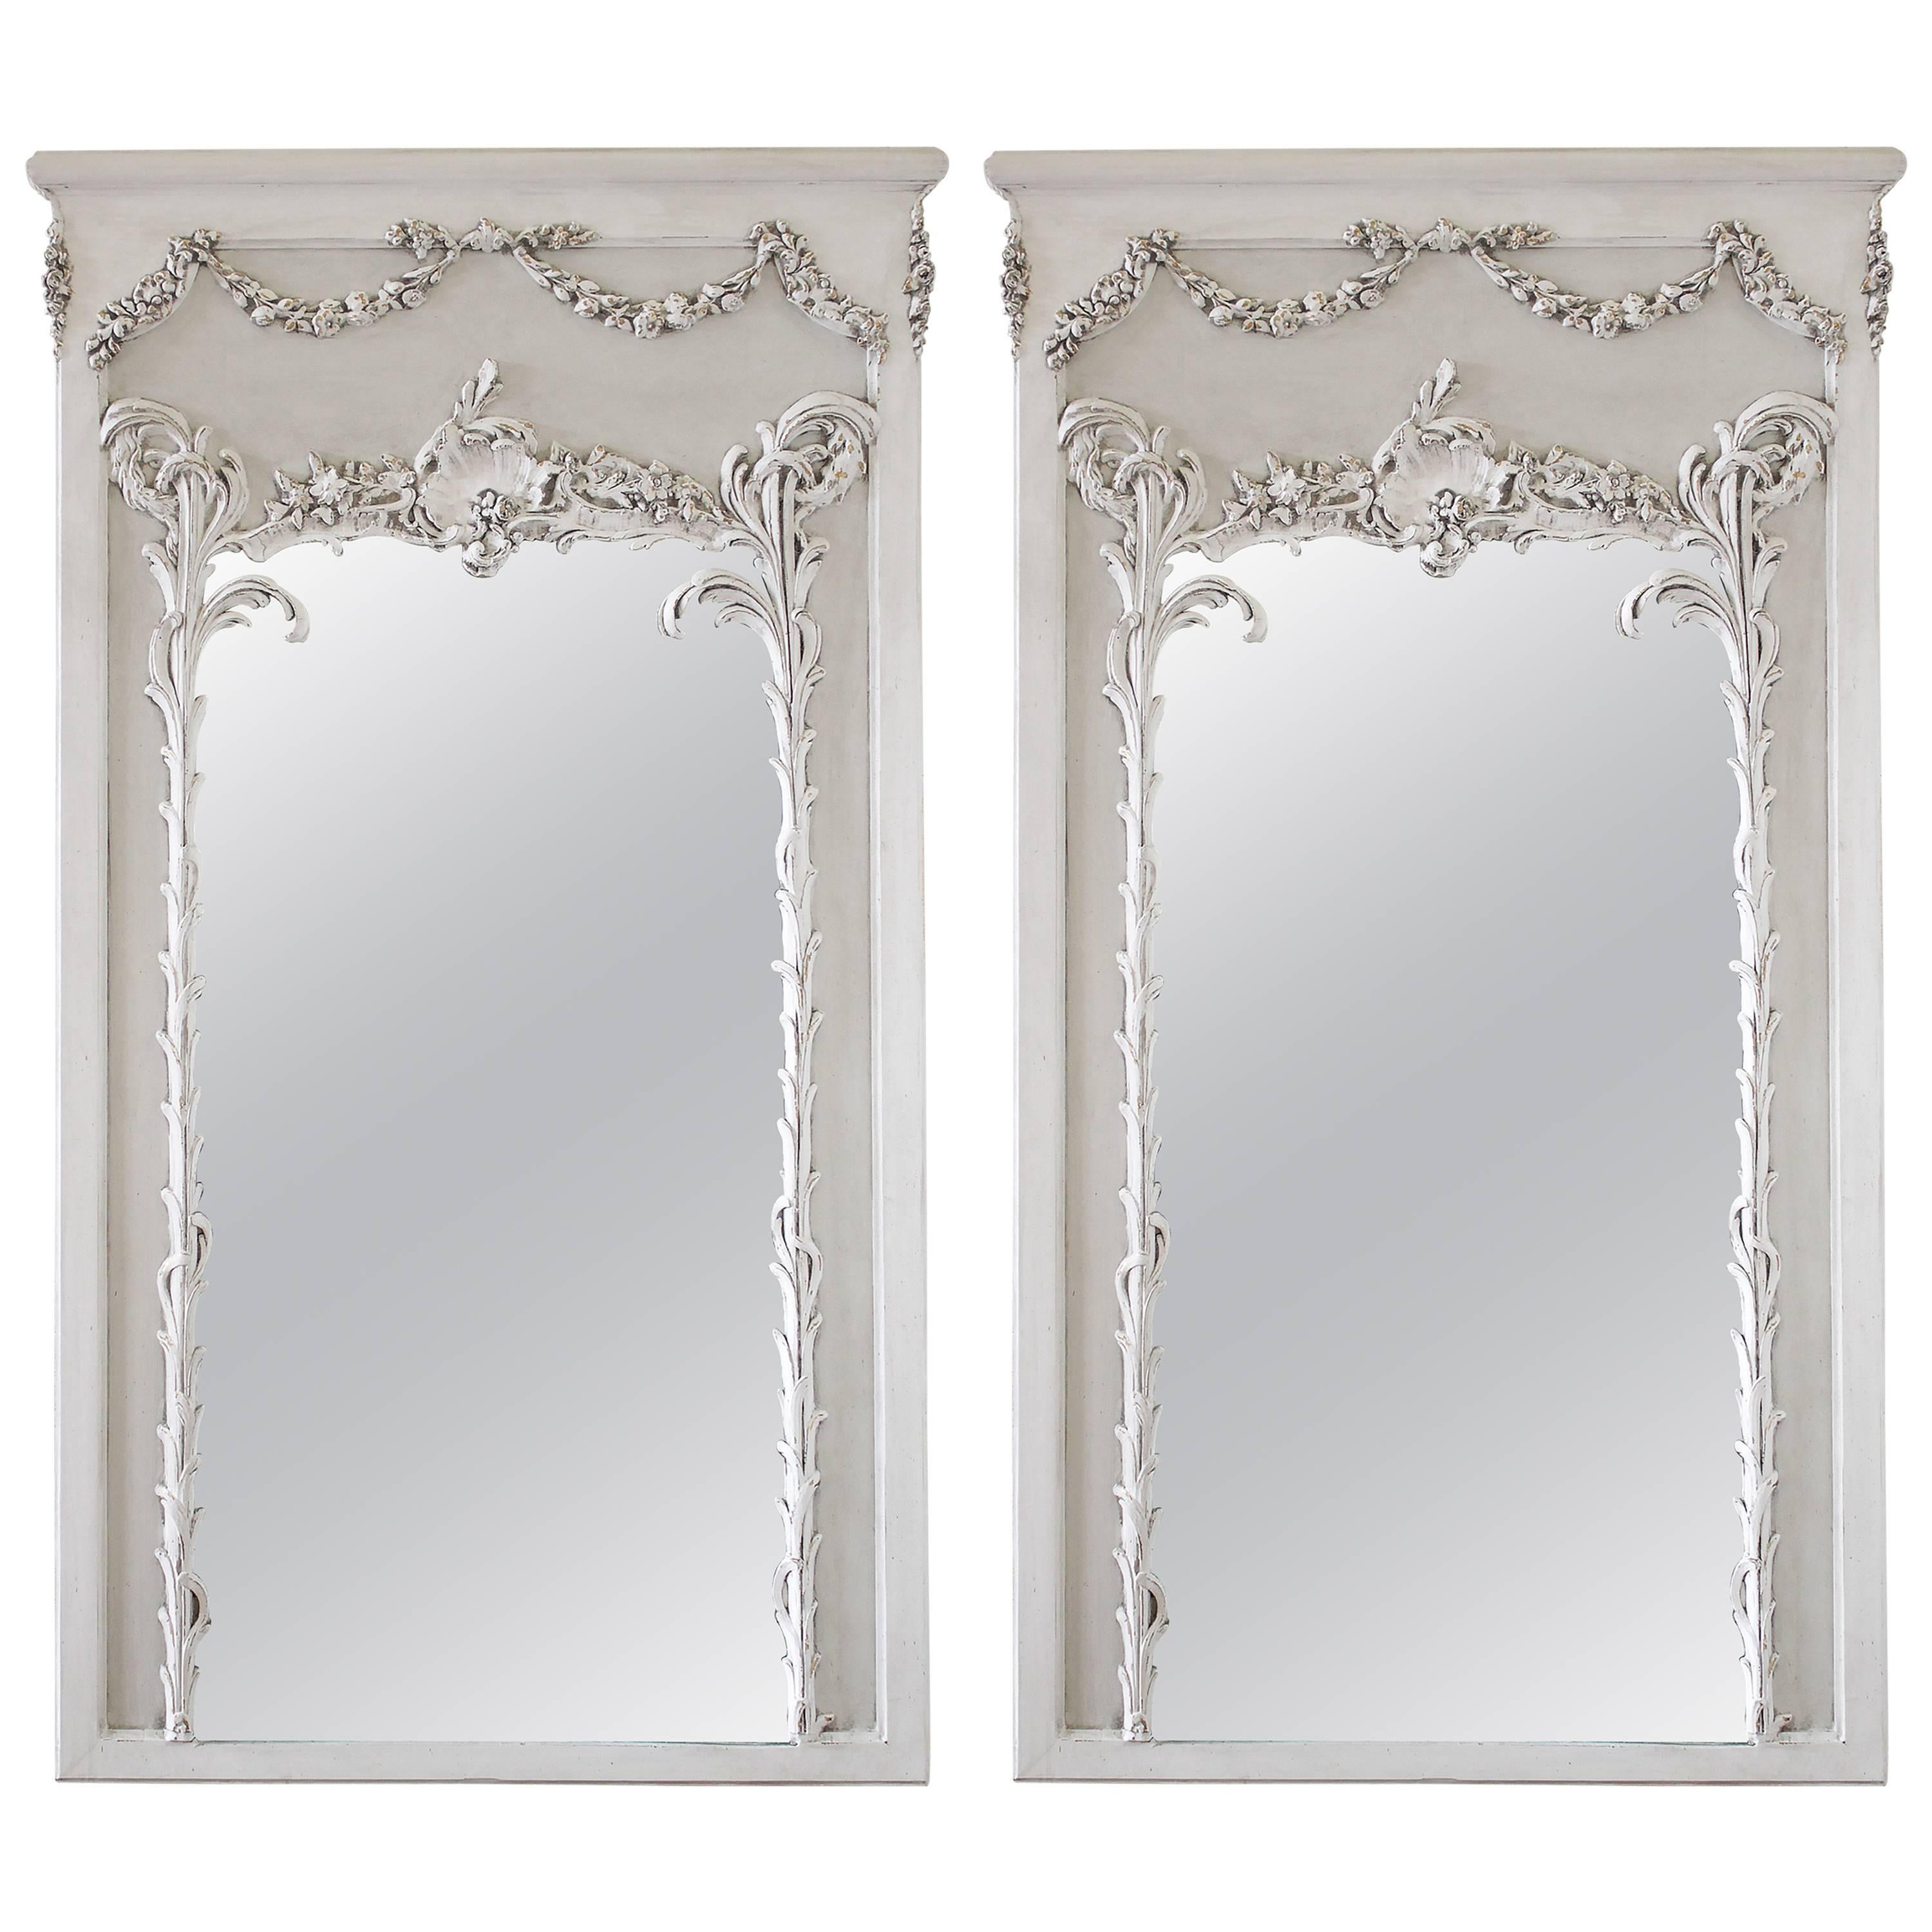 Pair of Vintage French Style Painted Trumeau Mirrors with Rose Swags